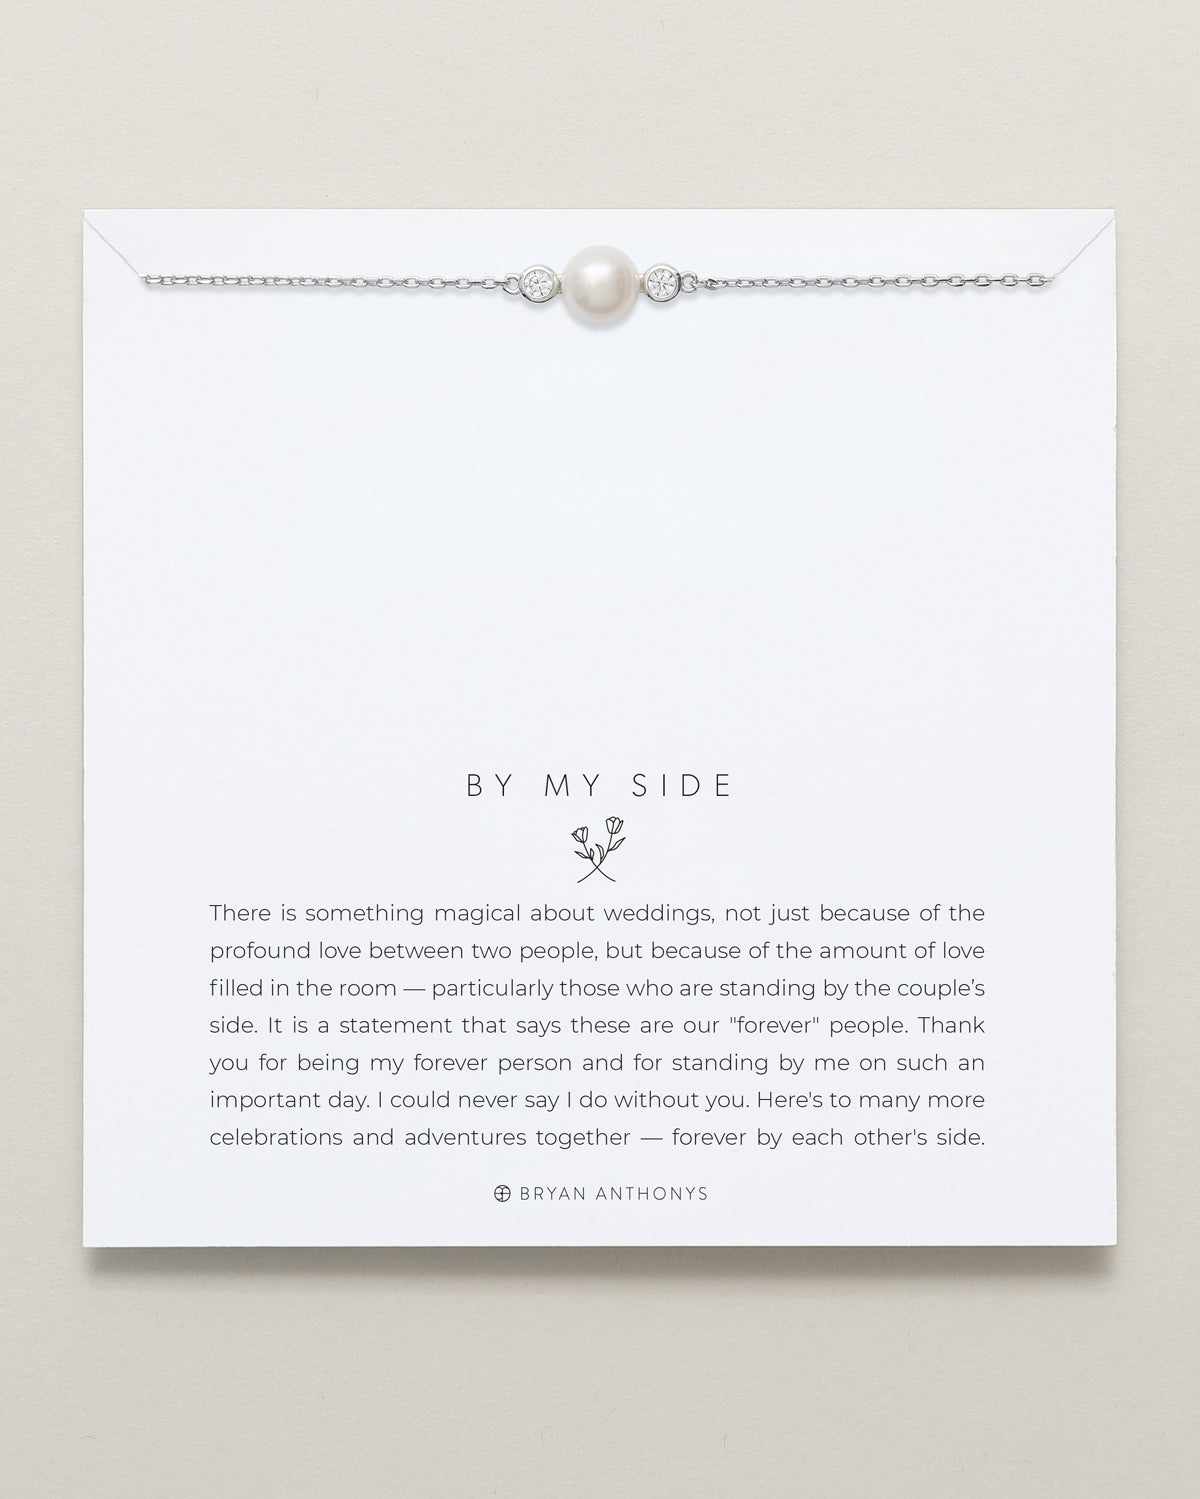 Bryan Anthonys By My Side Pearl Silver Bracelet On Card